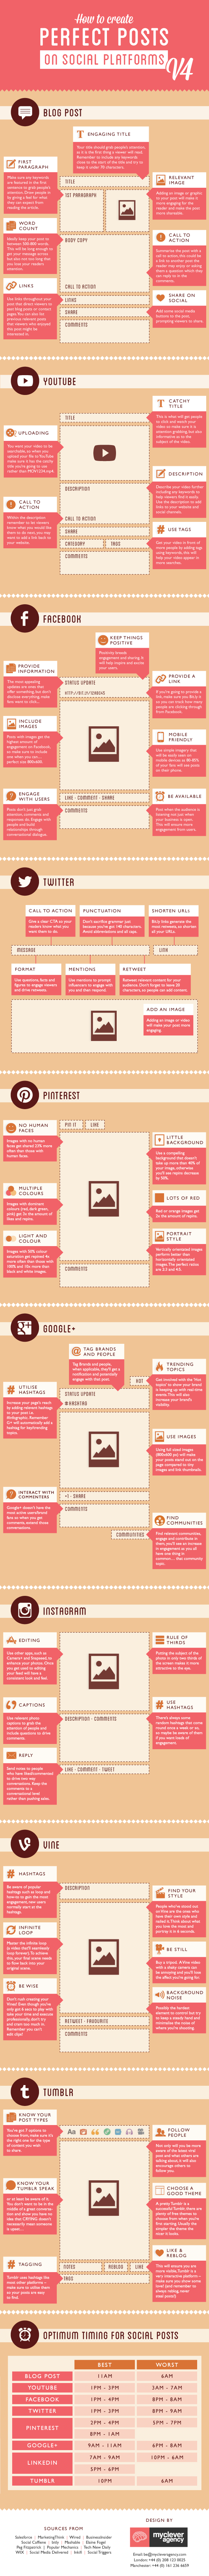 Guide to Social Media Posts on YouTube, Instagram, Vine, and Tumblr (Infographic)